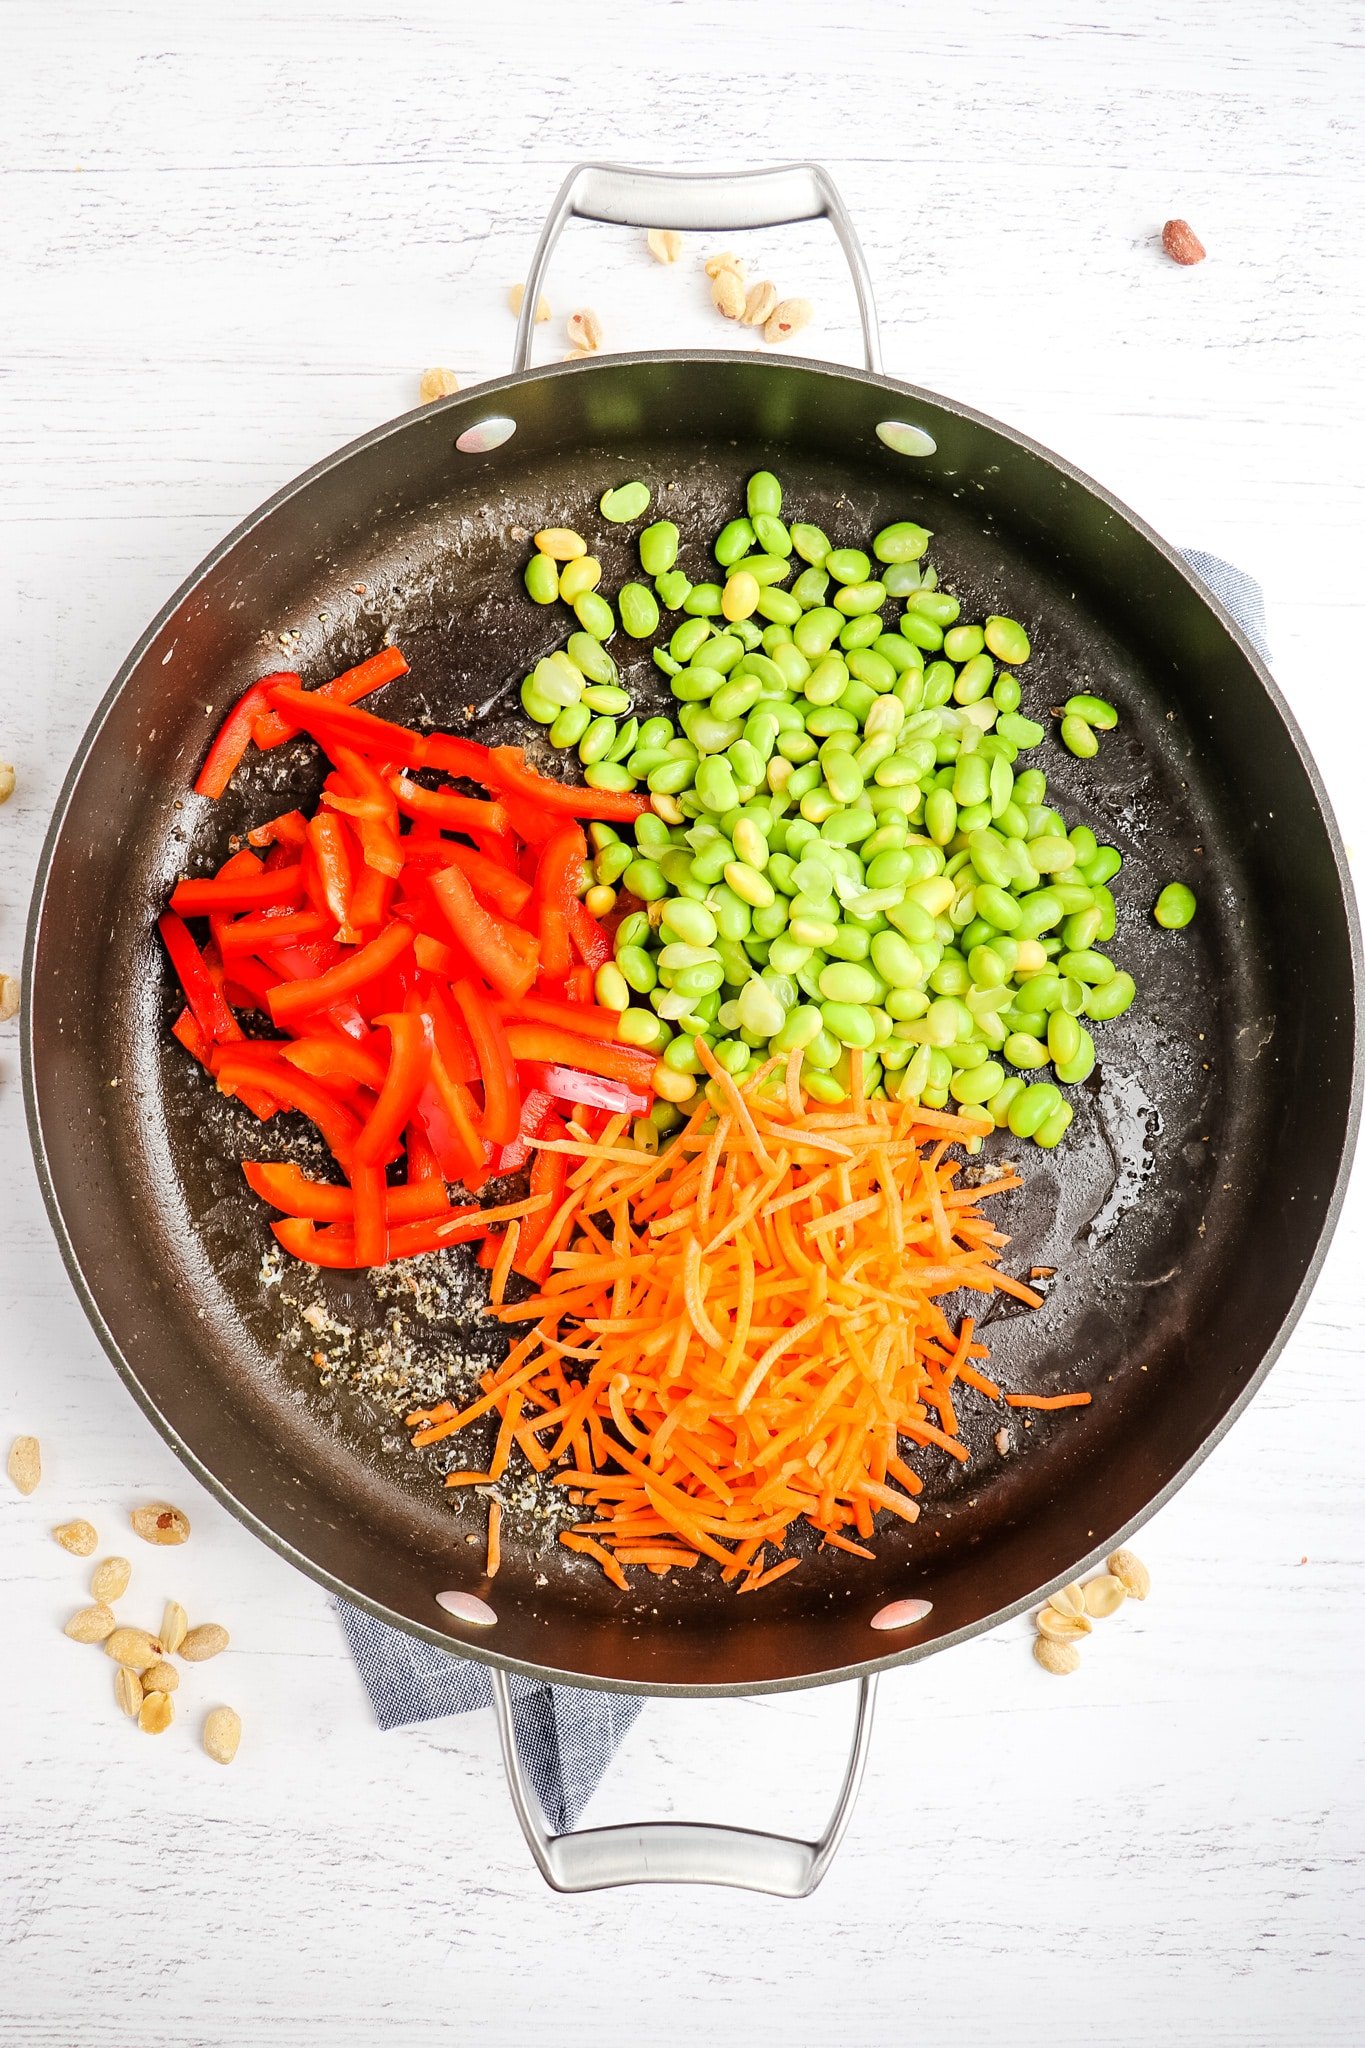 Shredded carrots, edamame and red peppers in skillet for stir fry.